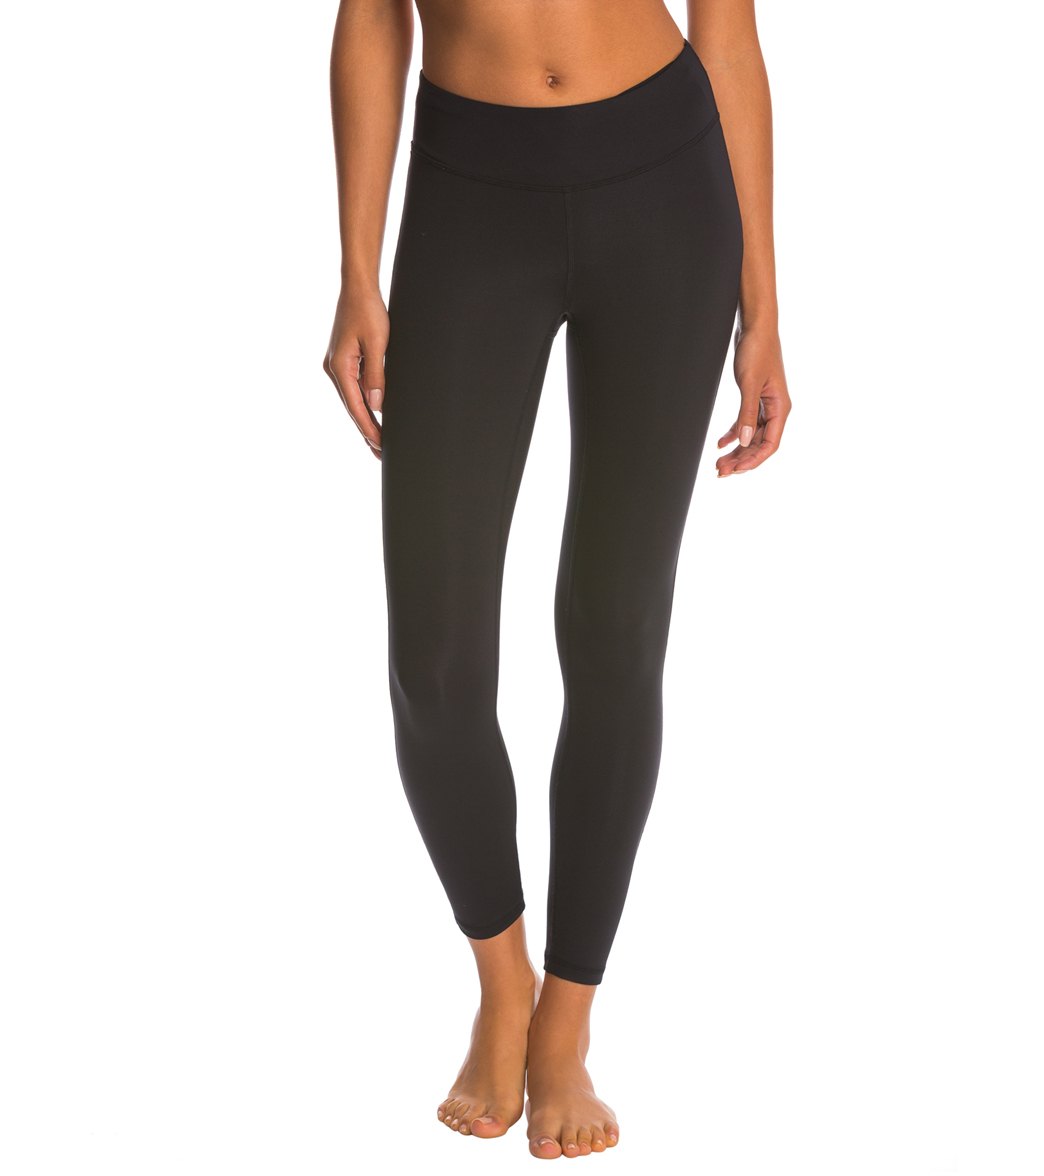 Funkita Electric Runner Tight Pants - Black 10 Polyester - Swimoutlet.com